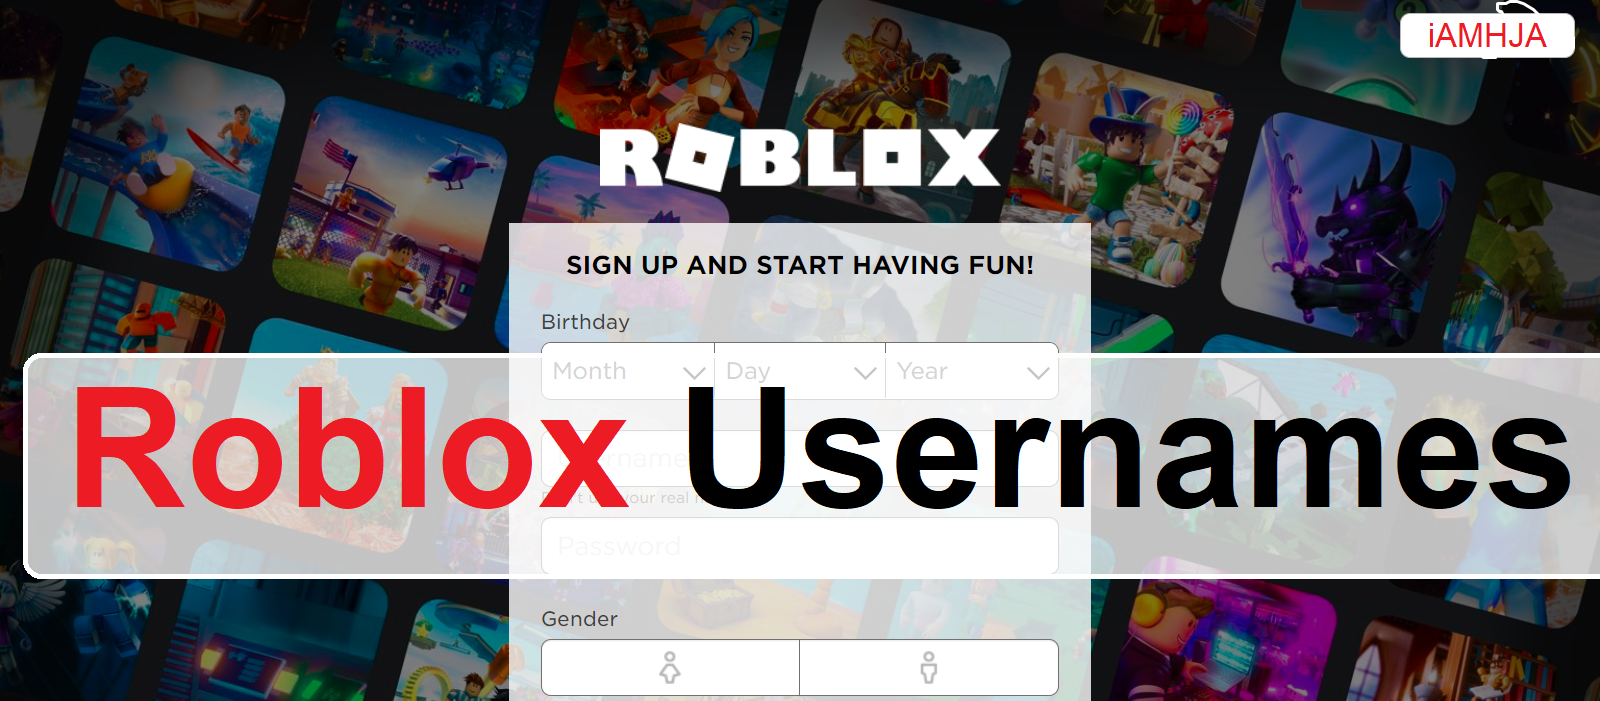 399 Roblox Usernames Names That Are Not Taken - what are some cool names for roblox